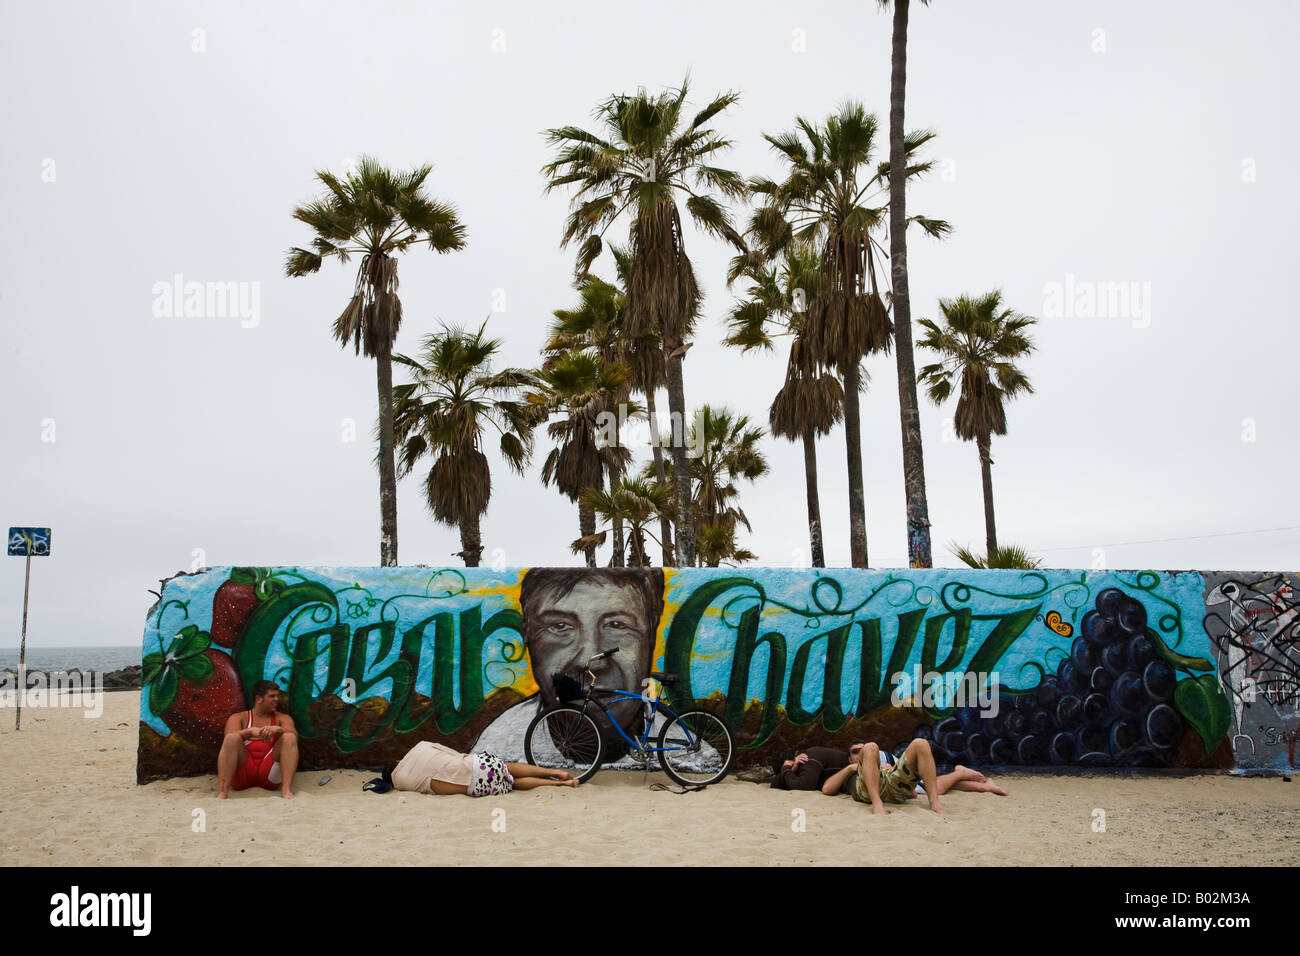 Bike riders rest and nap at a mural of Cesar Chavez Venice Beach Los Angeles California United States of America Stock Photo